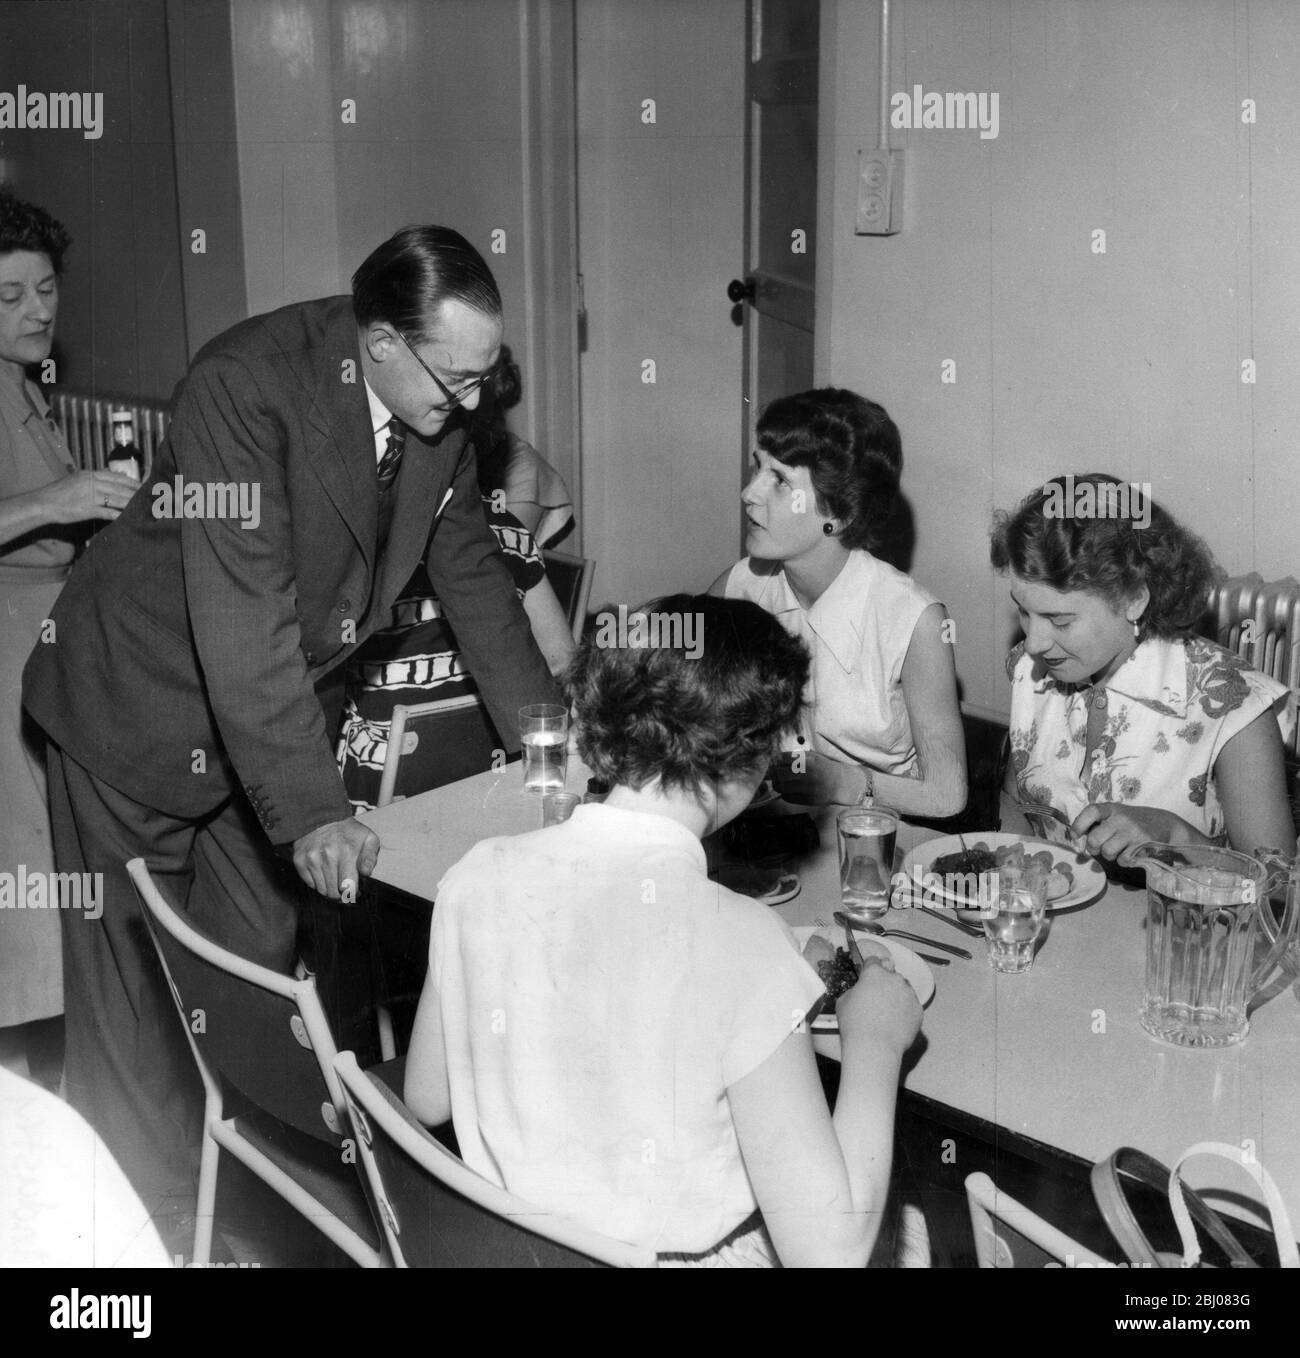 Nigel Radcliffe tours the world fitting perfect kitchens. Here he is seen chatting to office girls about the staff canteen. - London, England - 11 September 1954 - Stock Photo